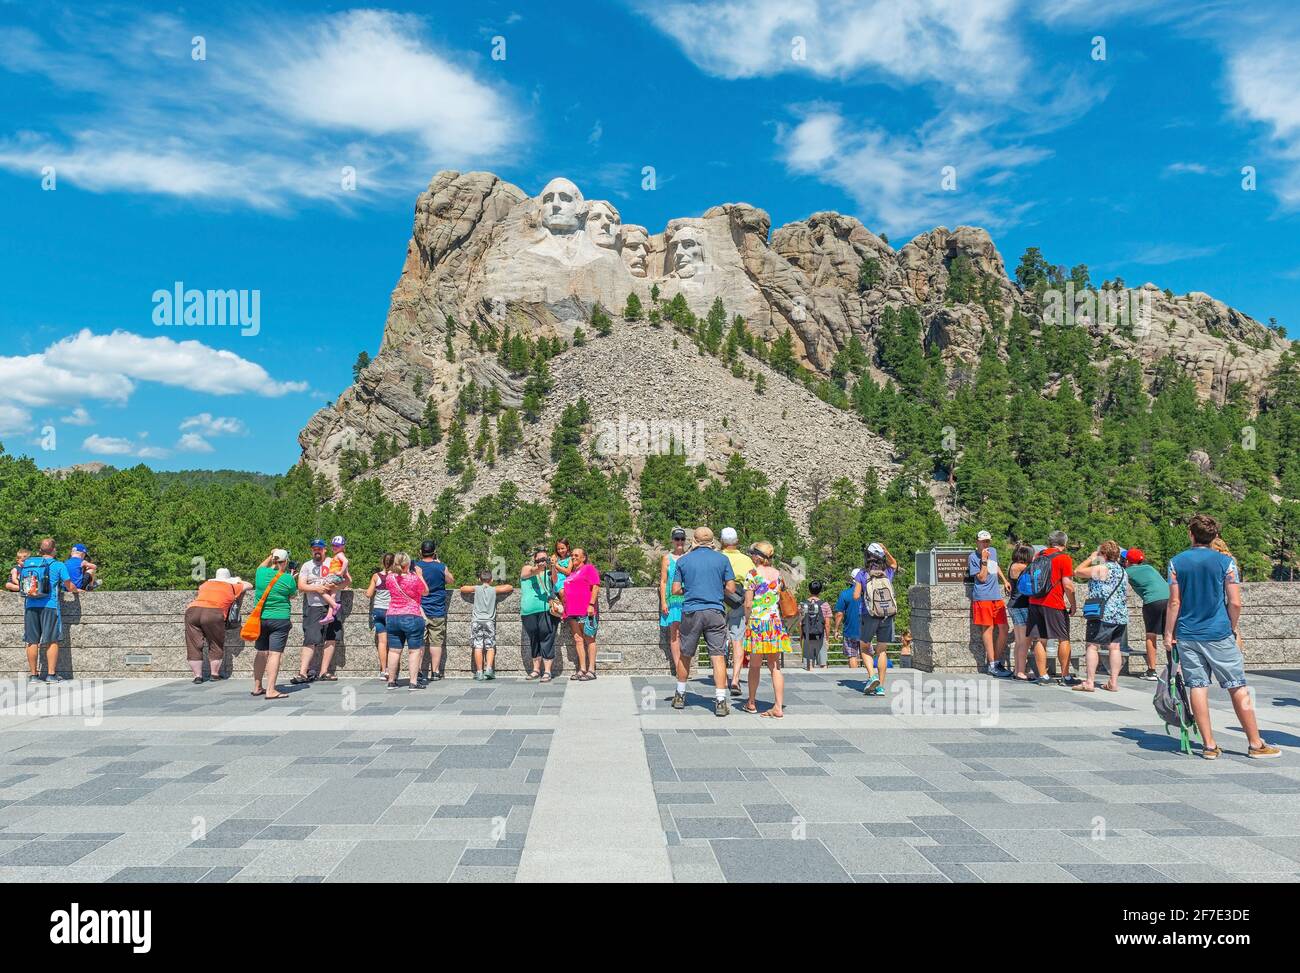 Tourists enjoying the view over Mount Rushmore national monument in summer, South Dakota, United States of America (USA). Stock Photo